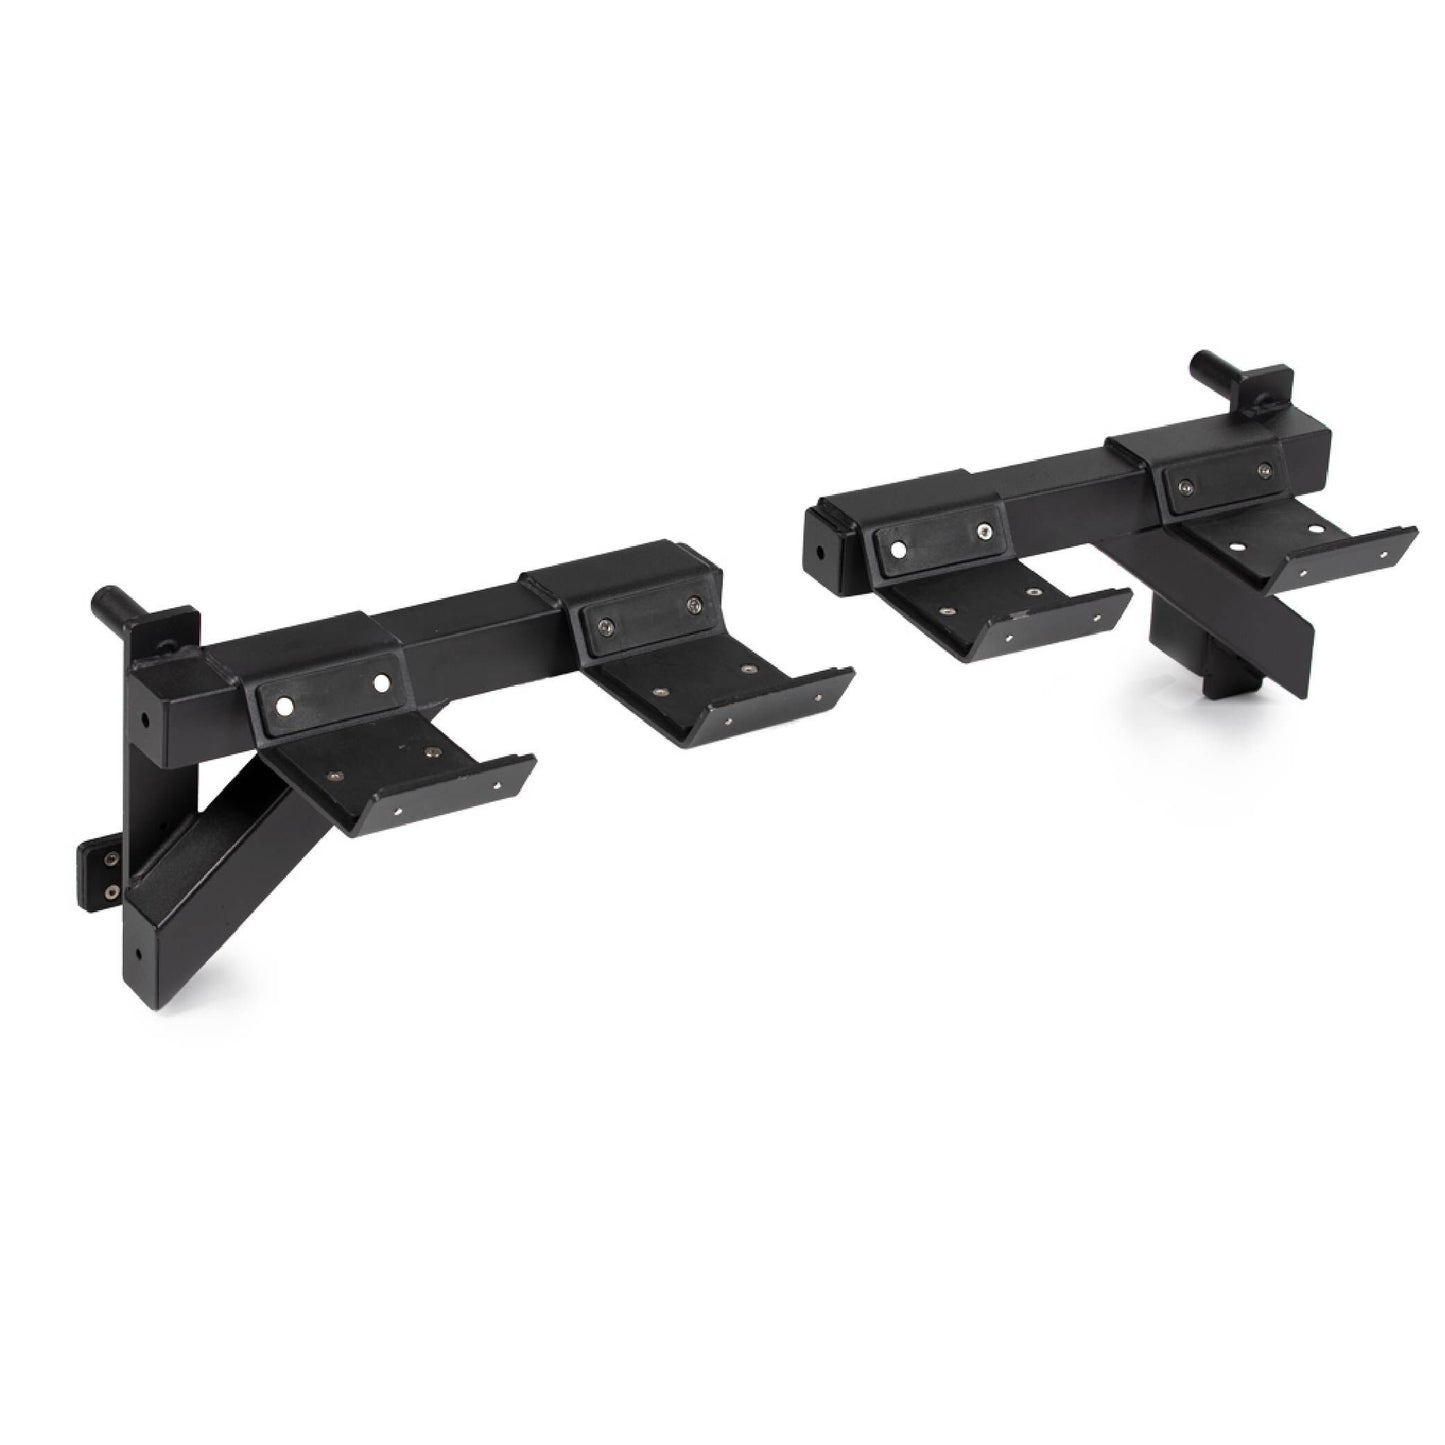 T-2 Series Dumbbell Weight Bar Holders - view 1